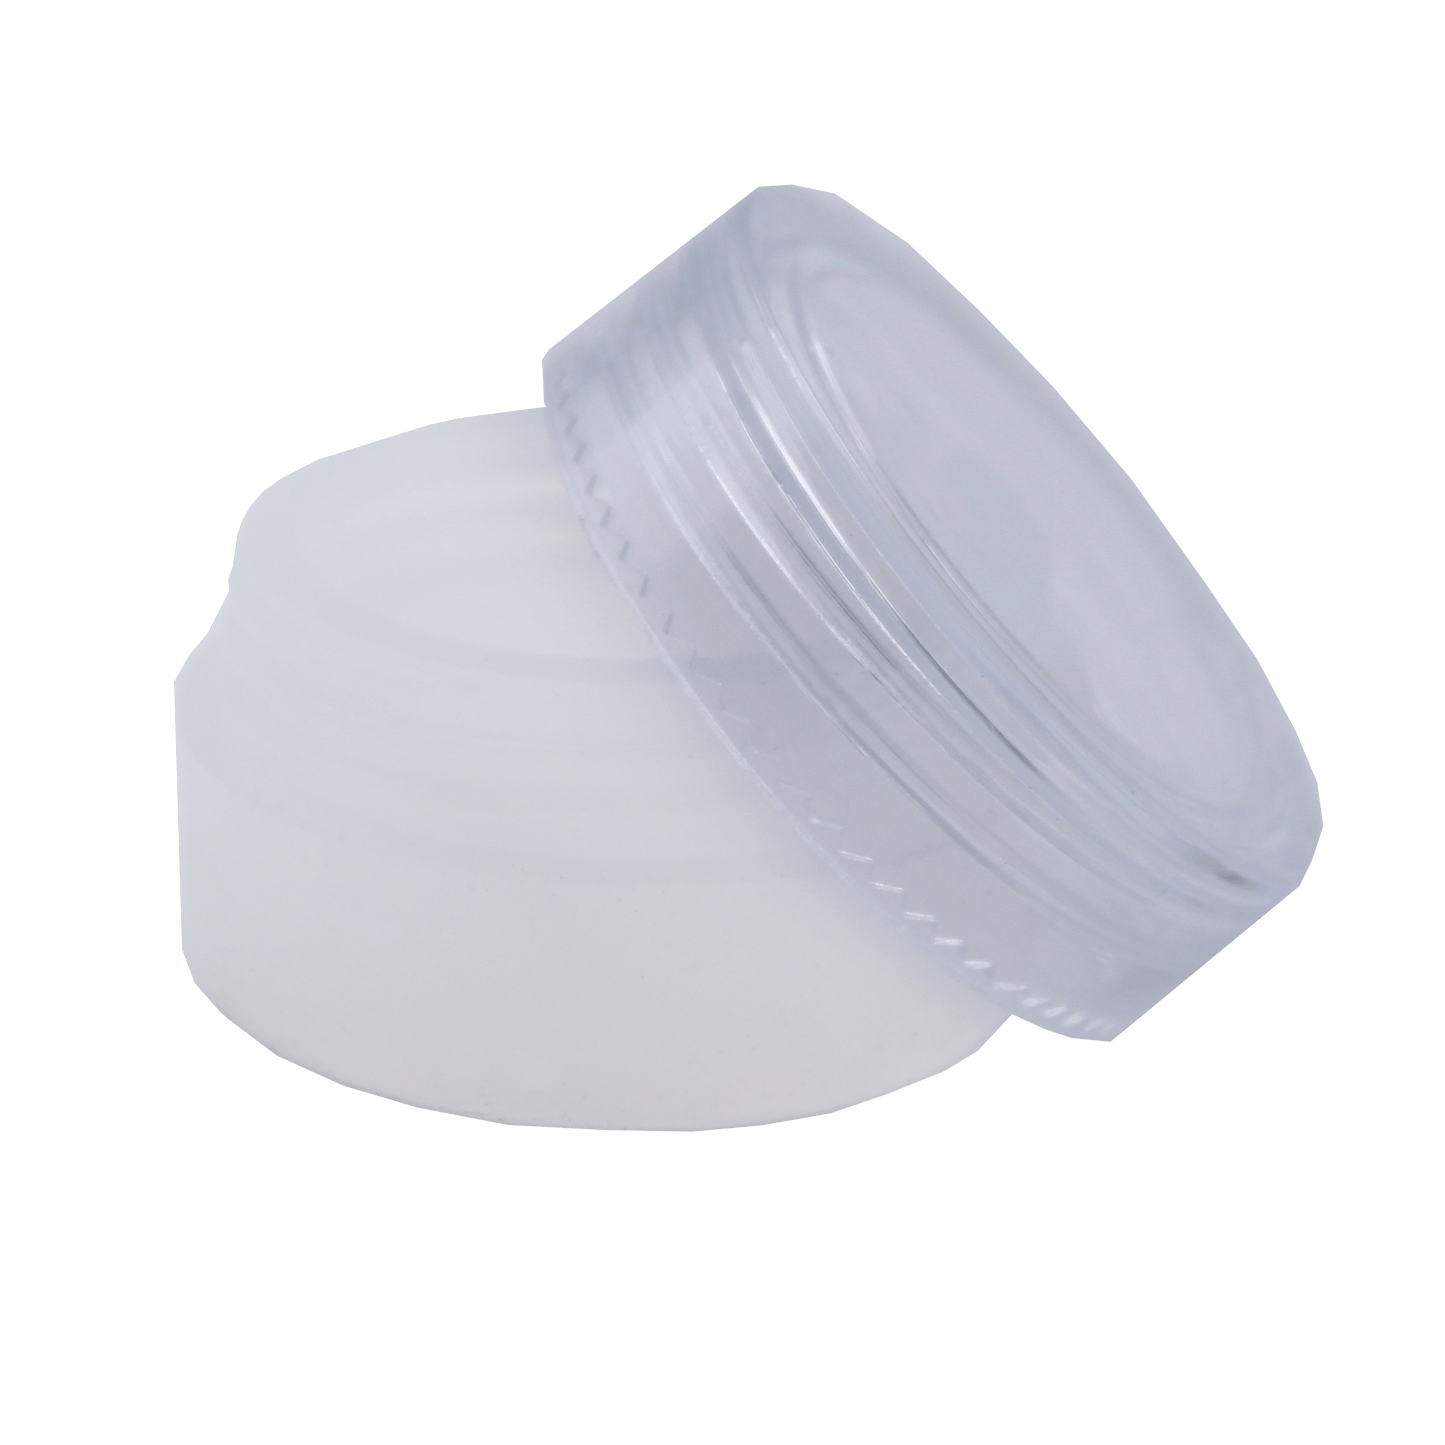 5ml Silicone Containers (Multiple Quantities) – Odyssey Direct